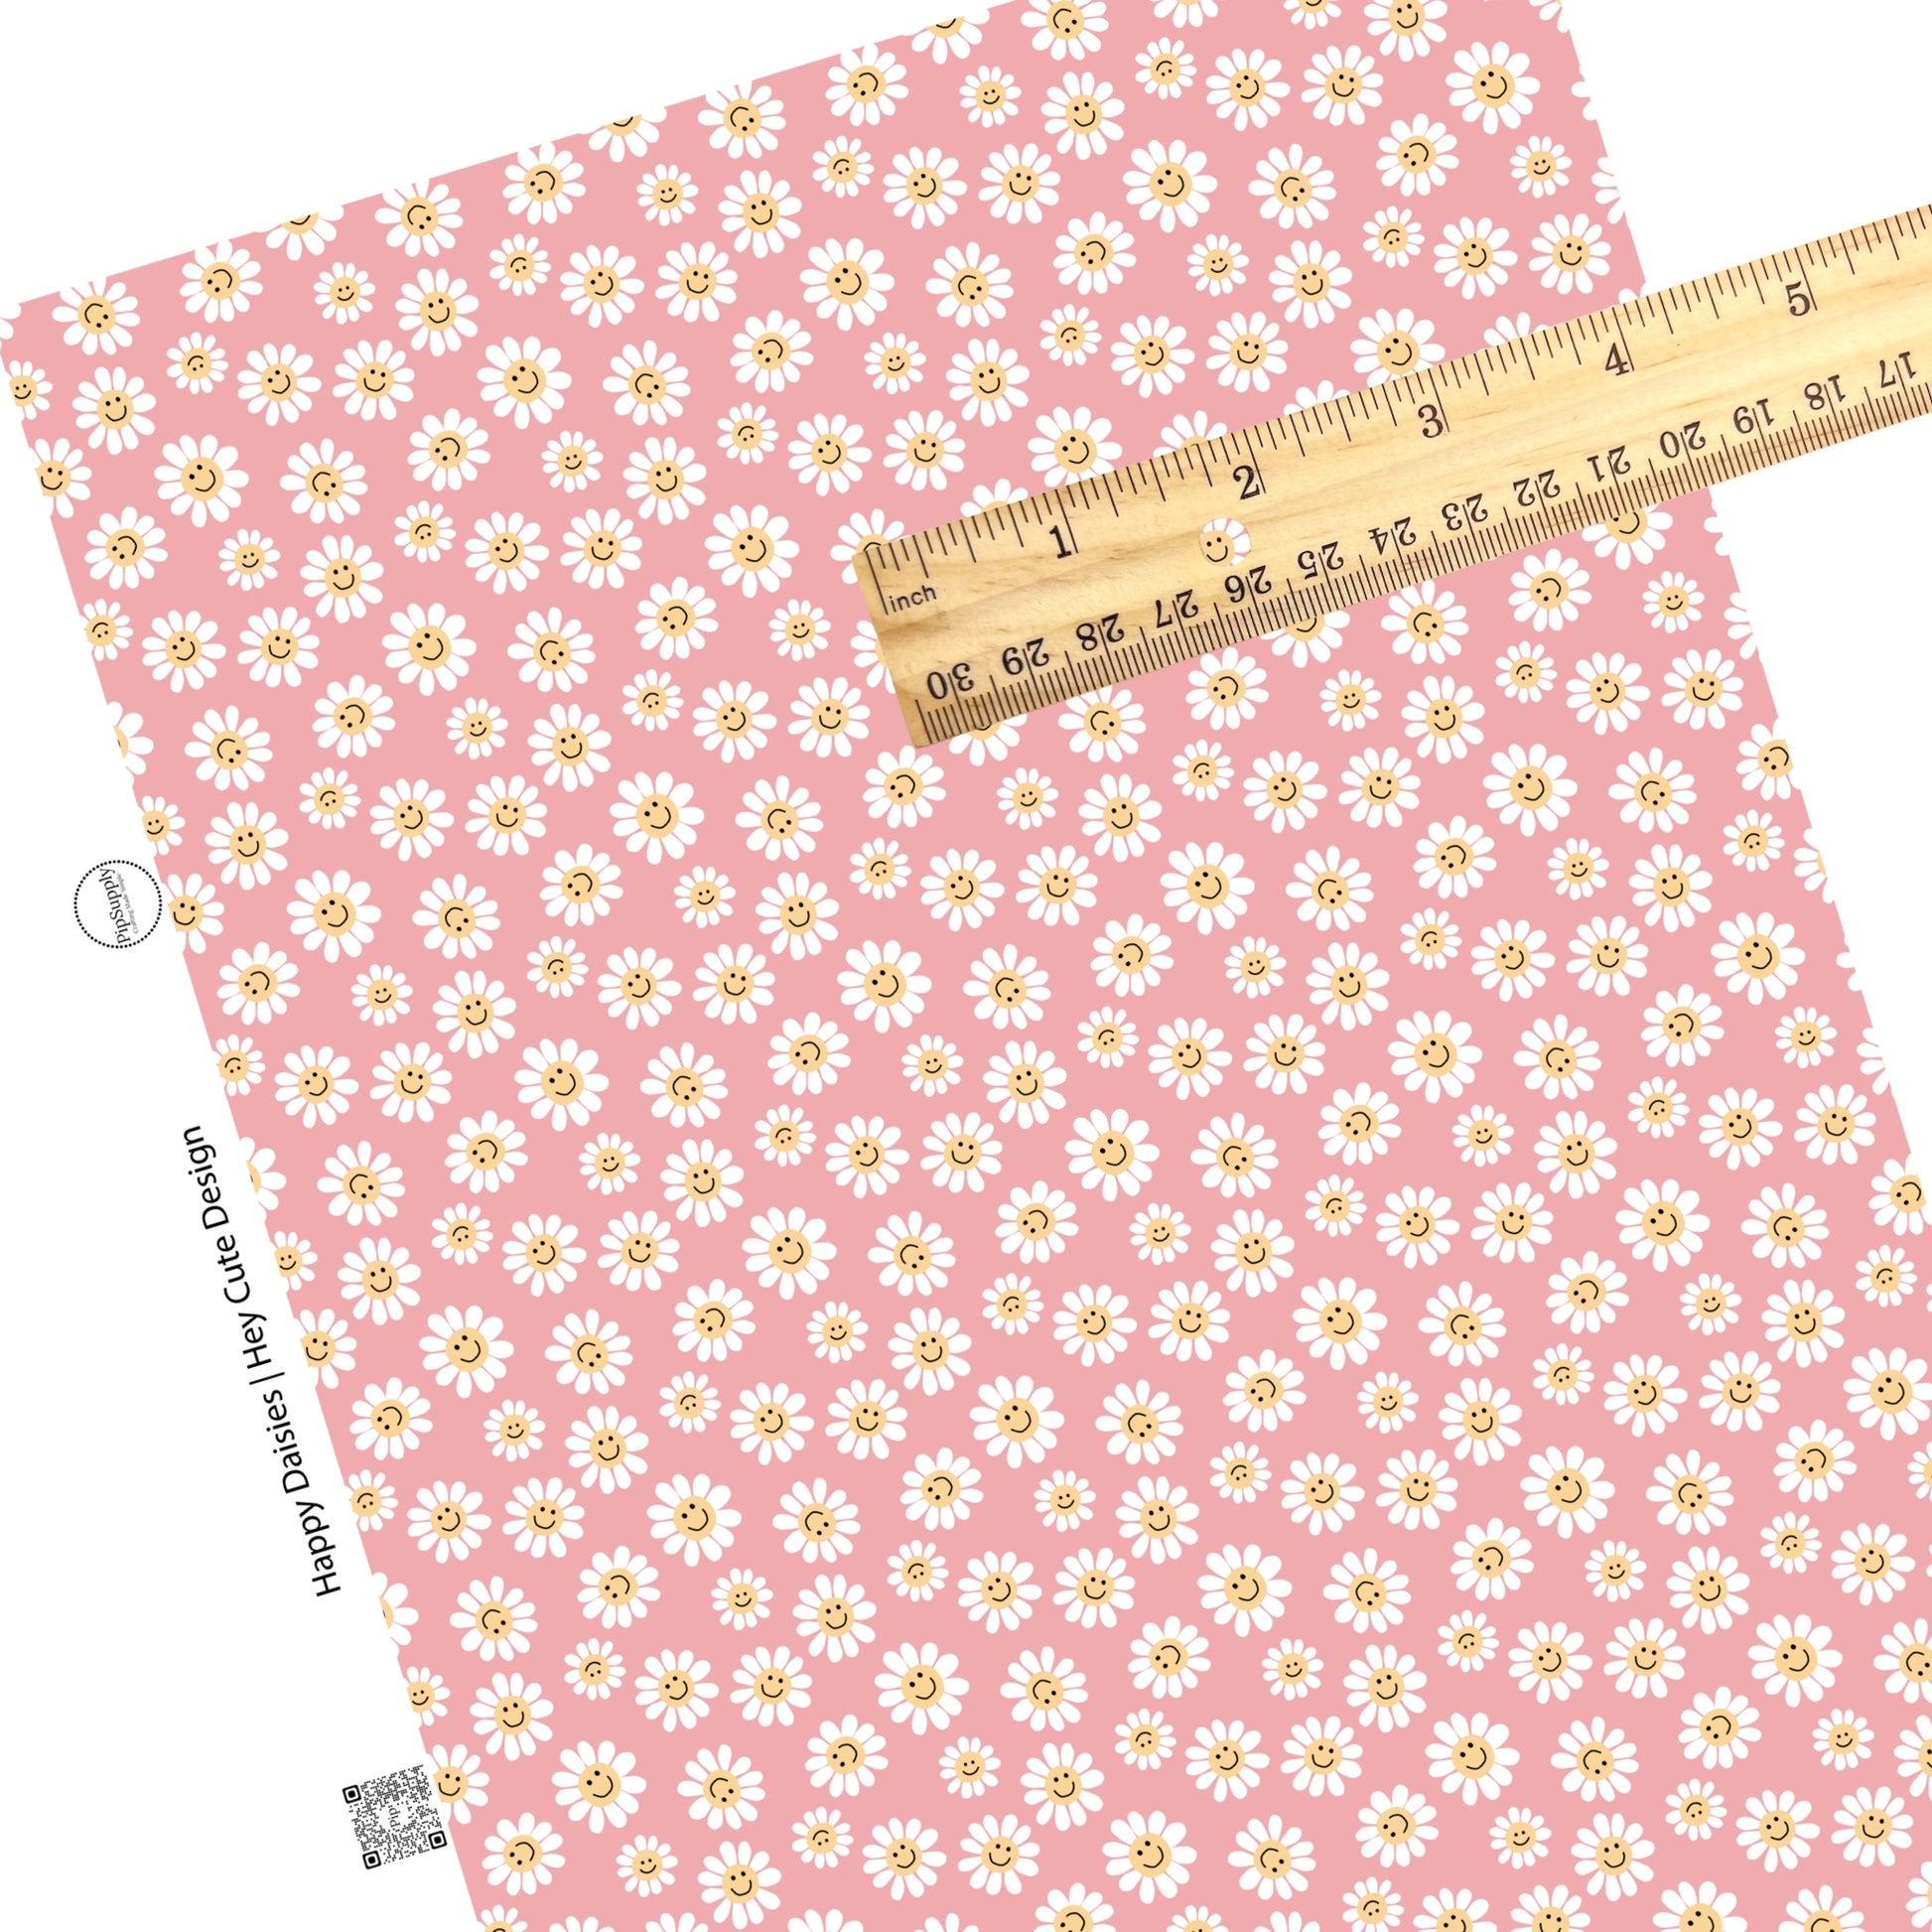 These summer faux leather sheets contain the following design elements: smiley faces on daisy flowers on pink. Our CPSIA compliant faux leather sheets or rolls can be used for all types of crafting projects.